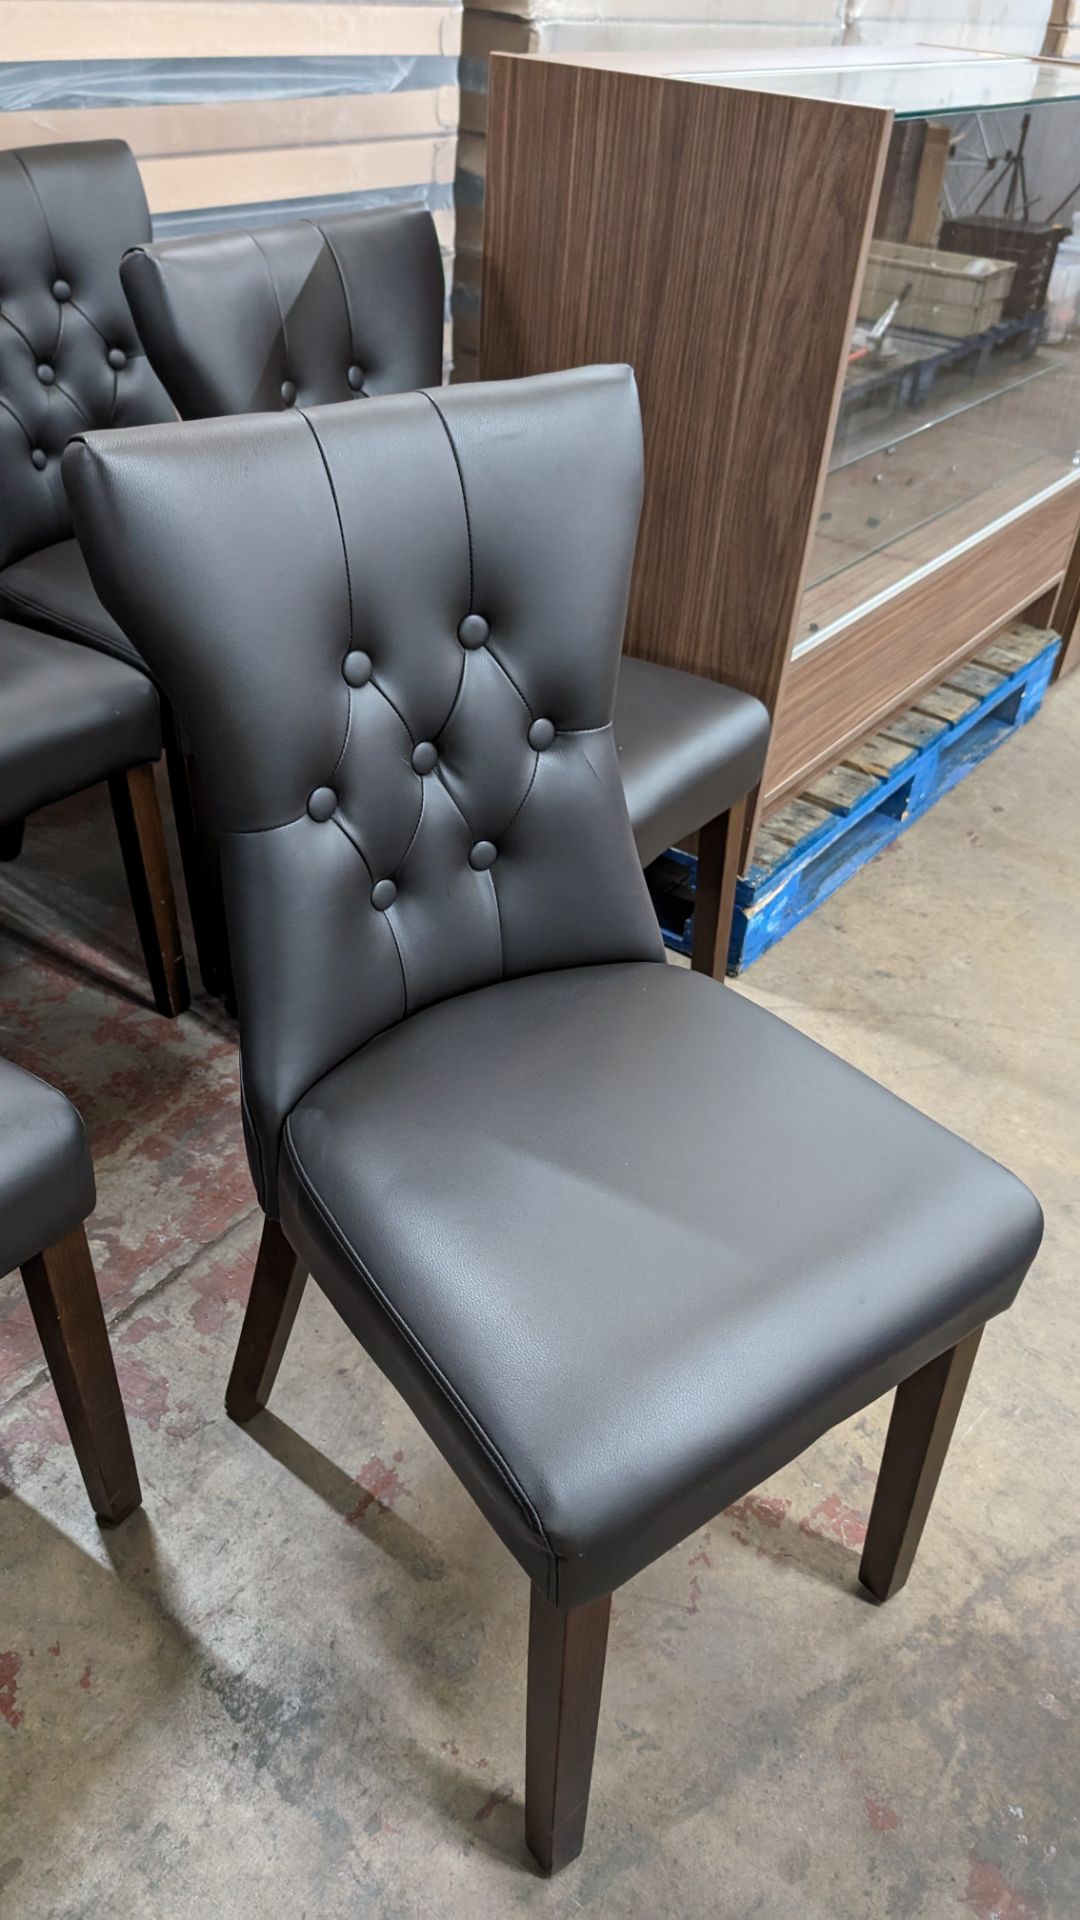 8 off matching pleather dark brown dining chairs - Image 7 of 7